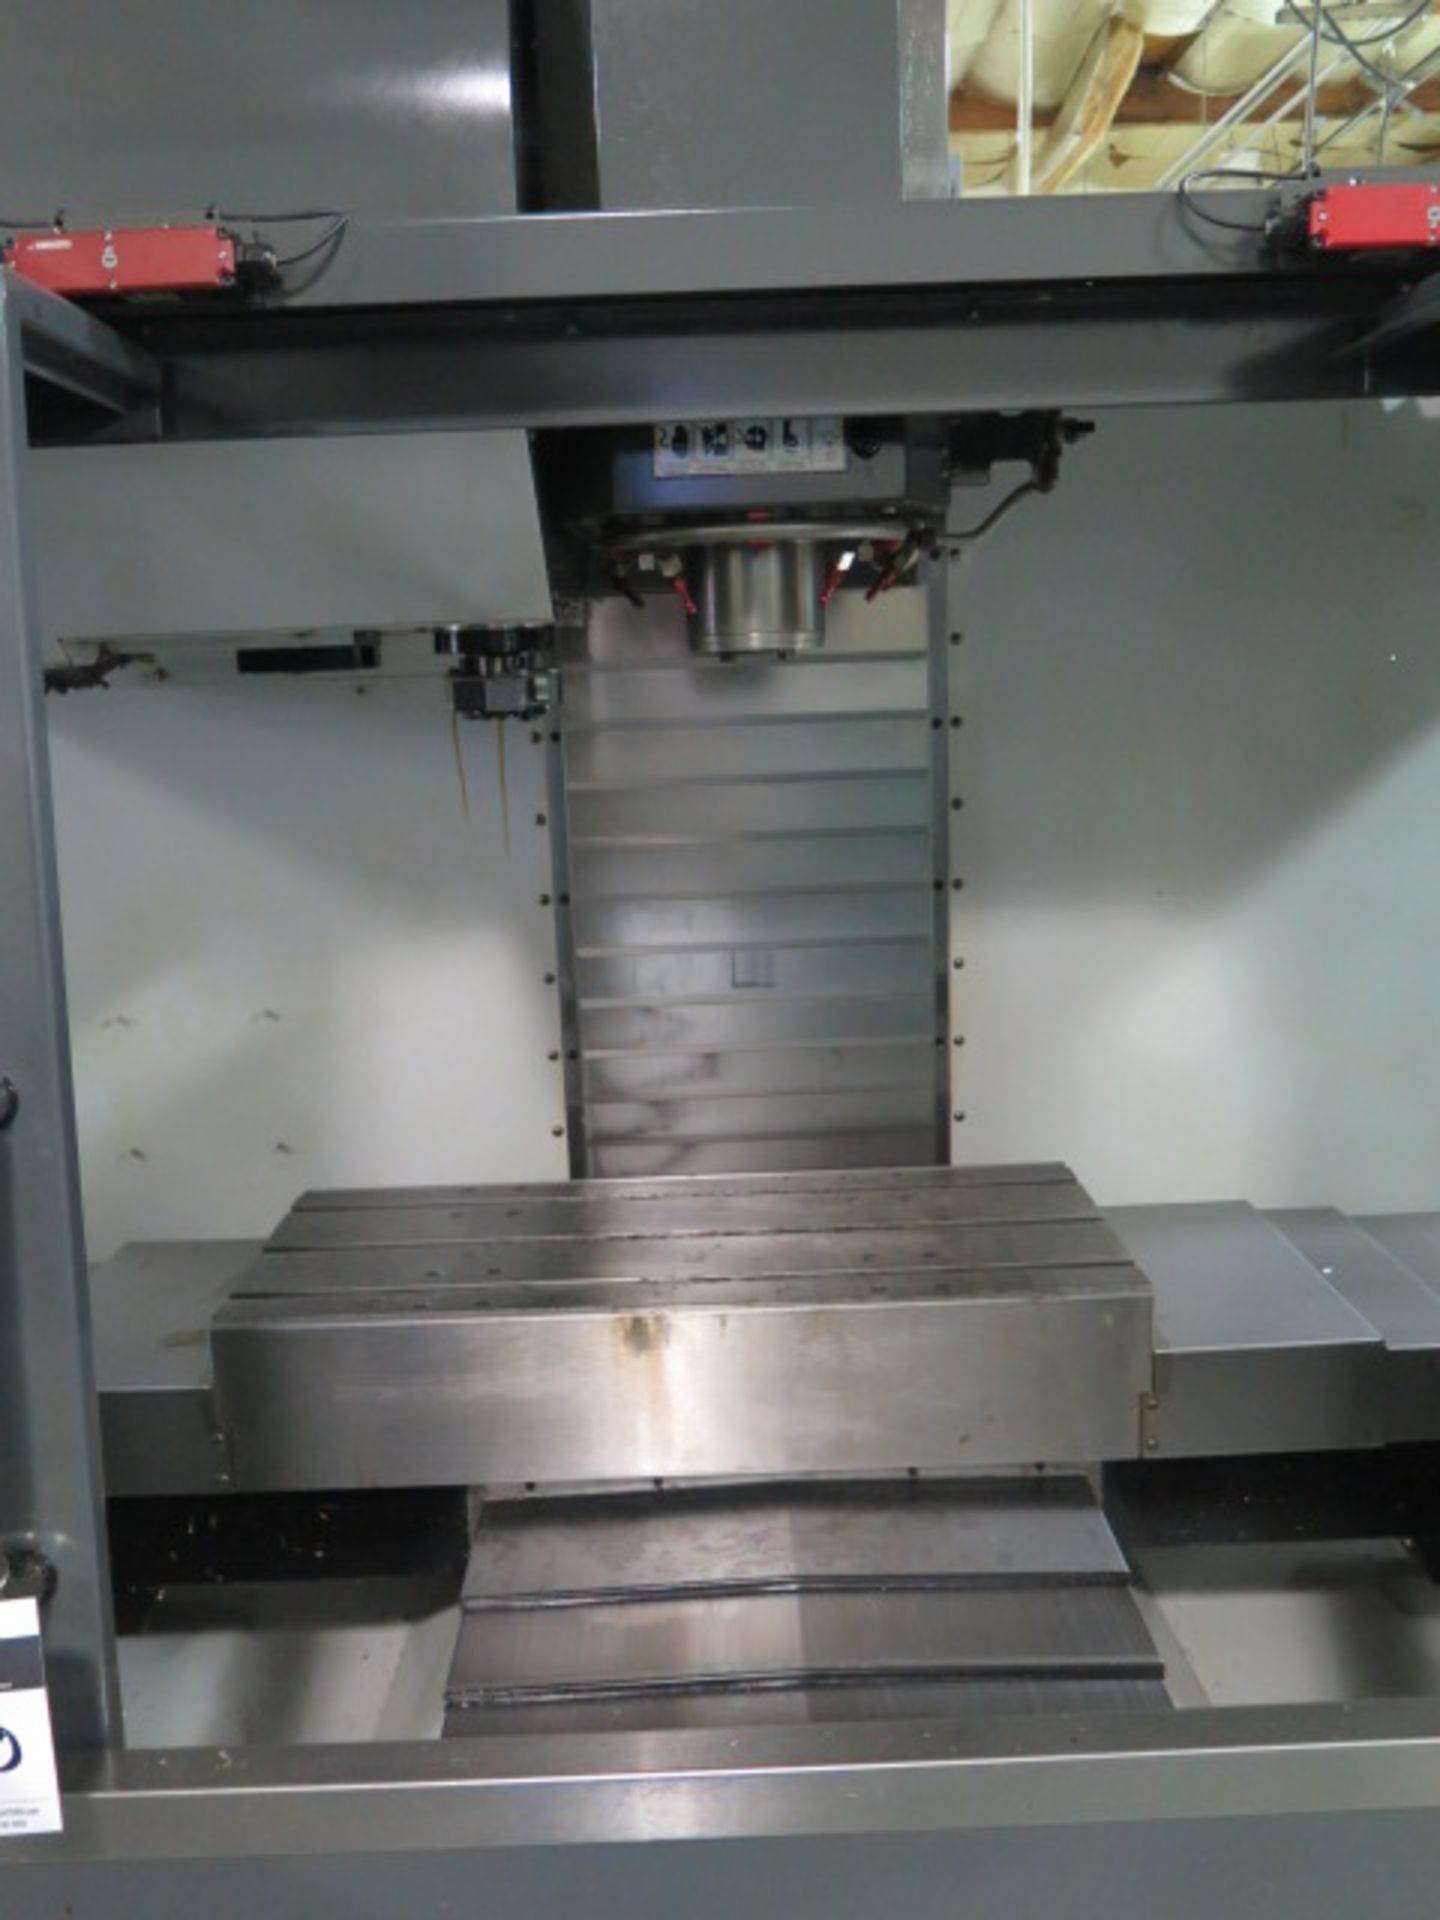 DEC 2014 Haas VF-2SS 4-Axis CNC Vertical Machining Center s/n 1118738 w/ Haas Controls, 24-Station - Image 5 of 13